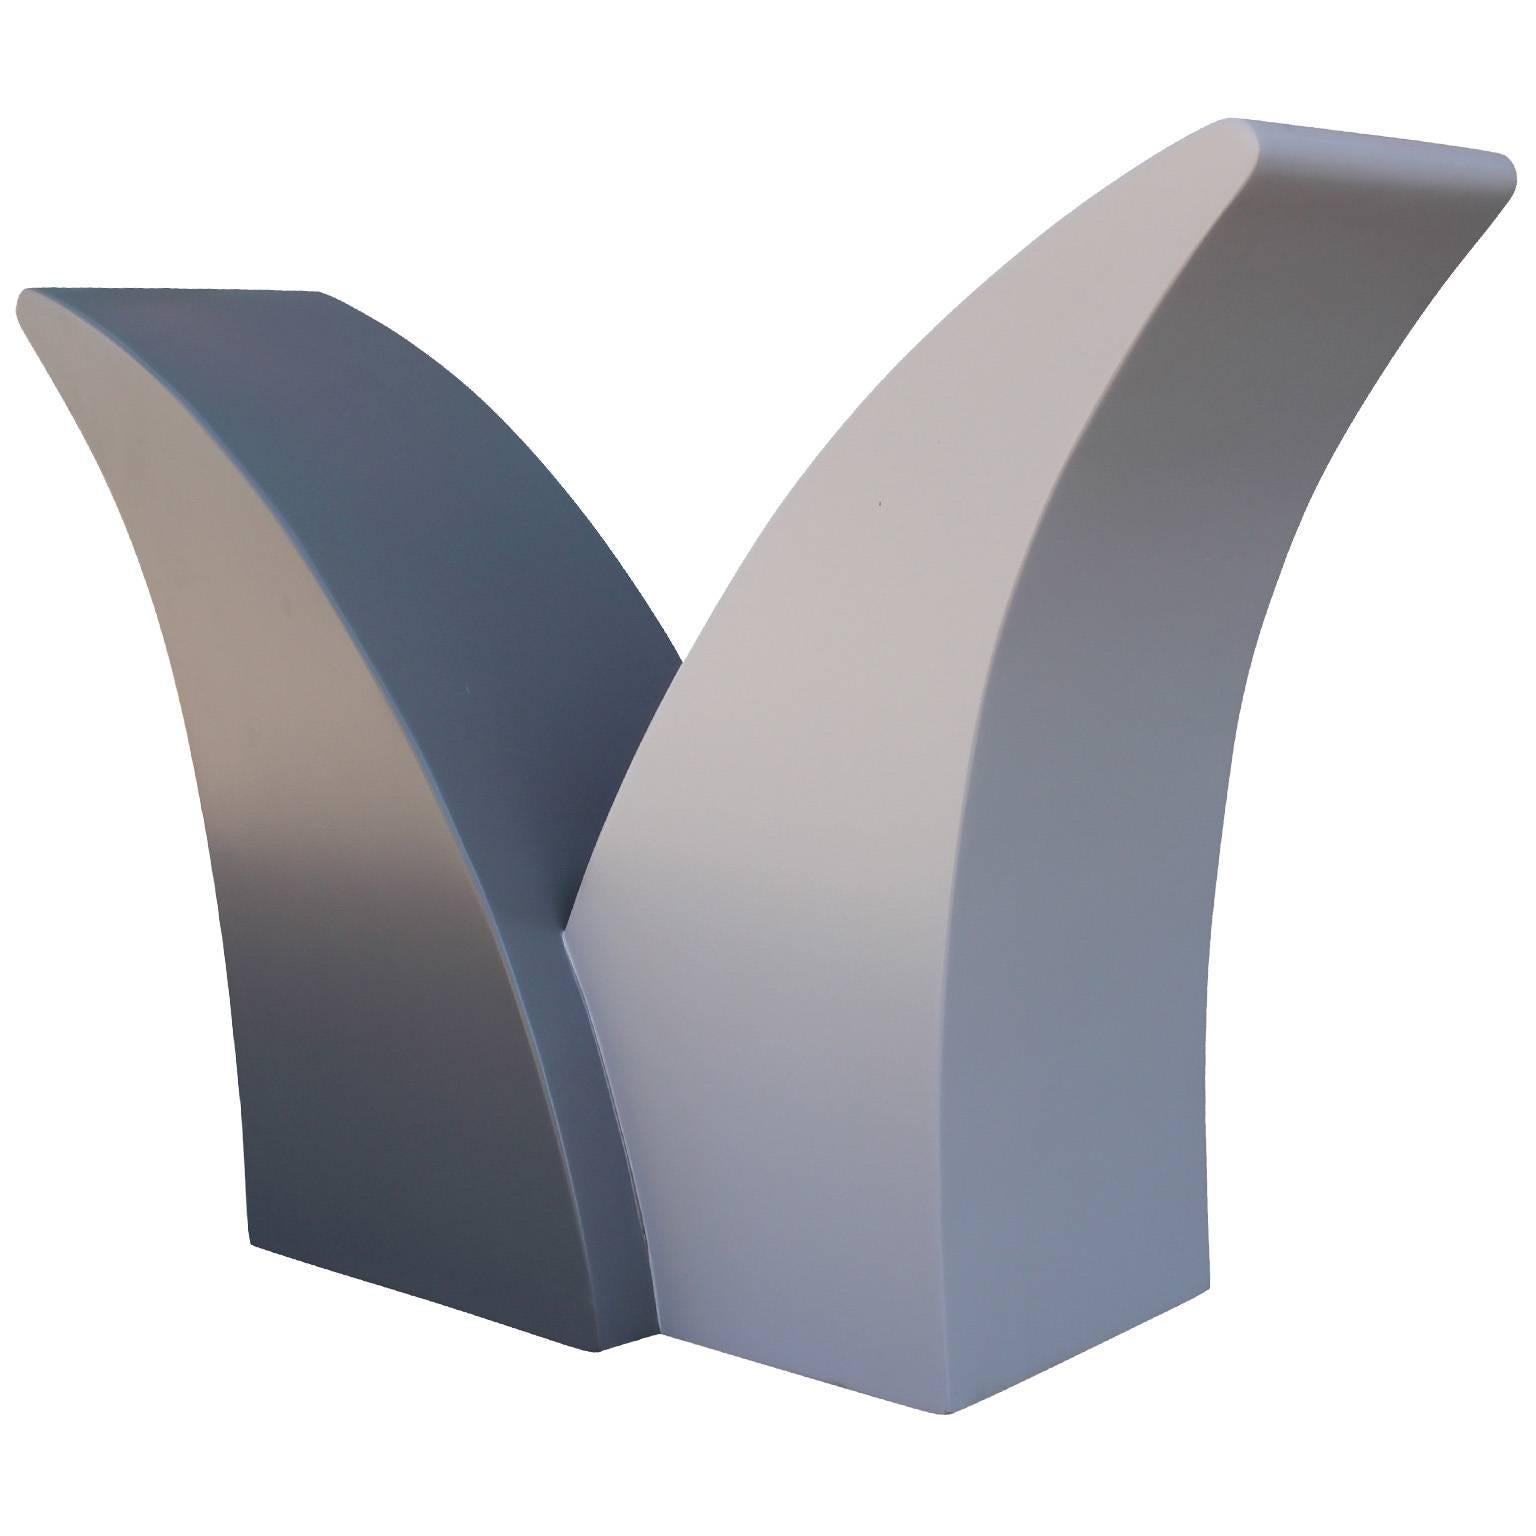 Sculptural table base lacquered in two-tone grey. Base had wonderful curved lines. Perfect topped with Lucite or glass.